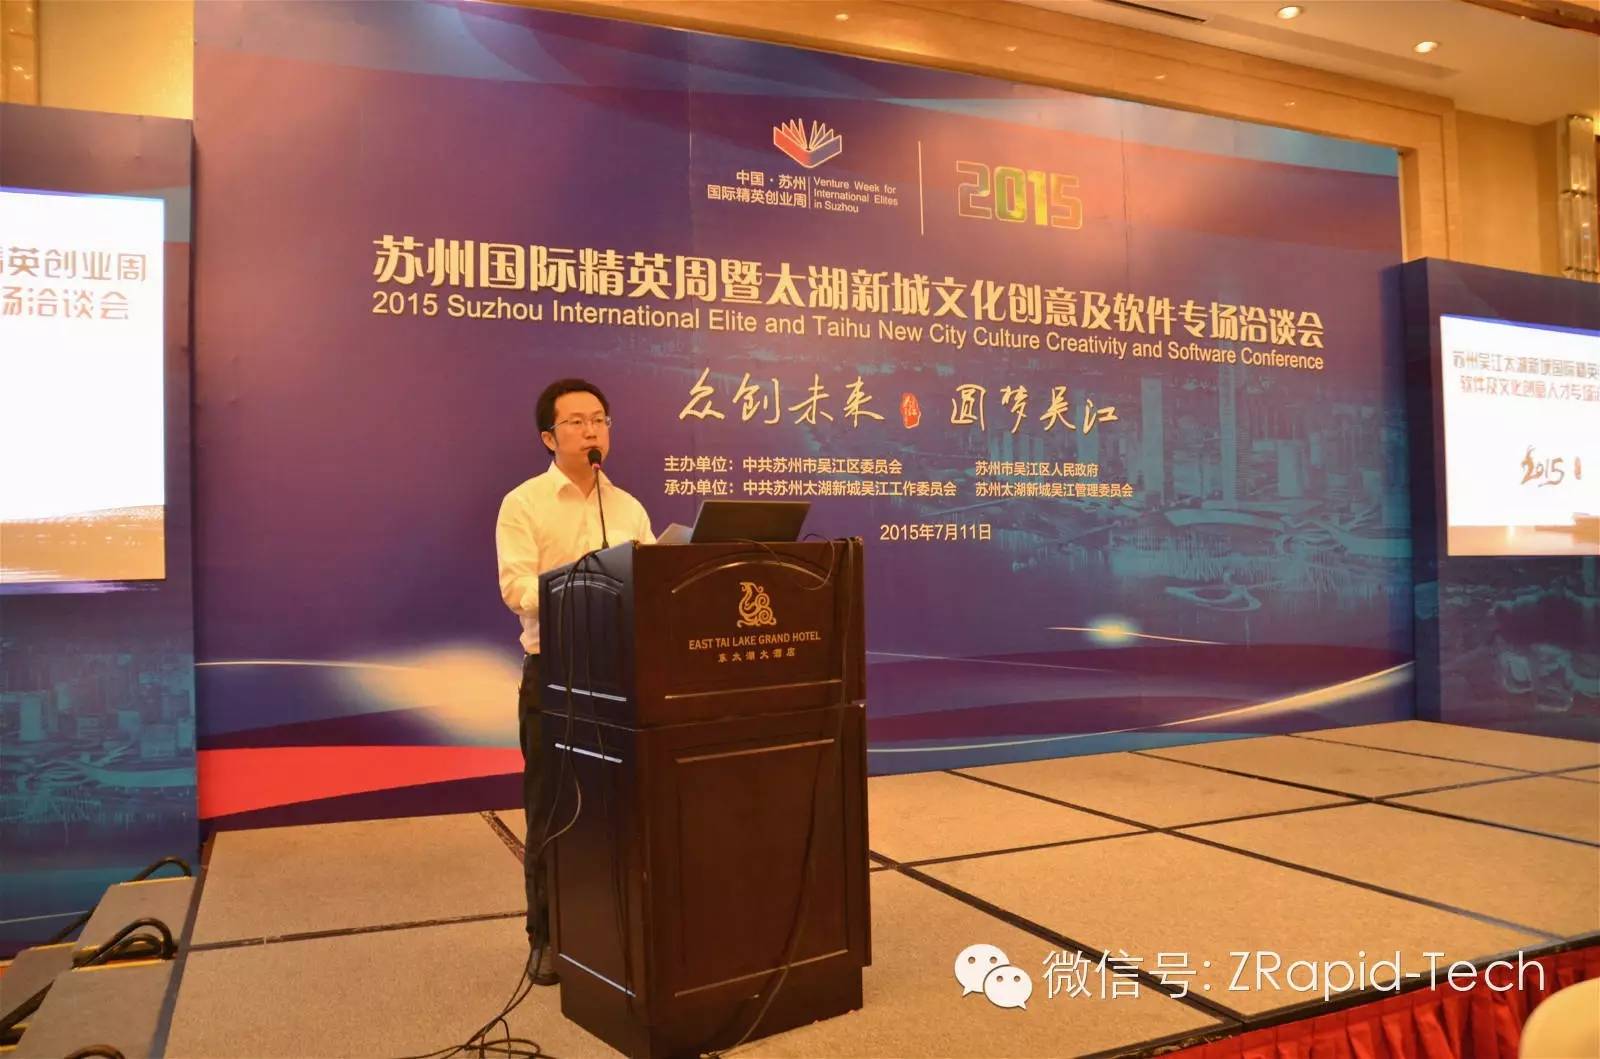 Dr. Zhou Hongzhi, president of ZRapid Technology, was invited to participate in the Suzhou international elite innovation and entrepreneurship special meeting